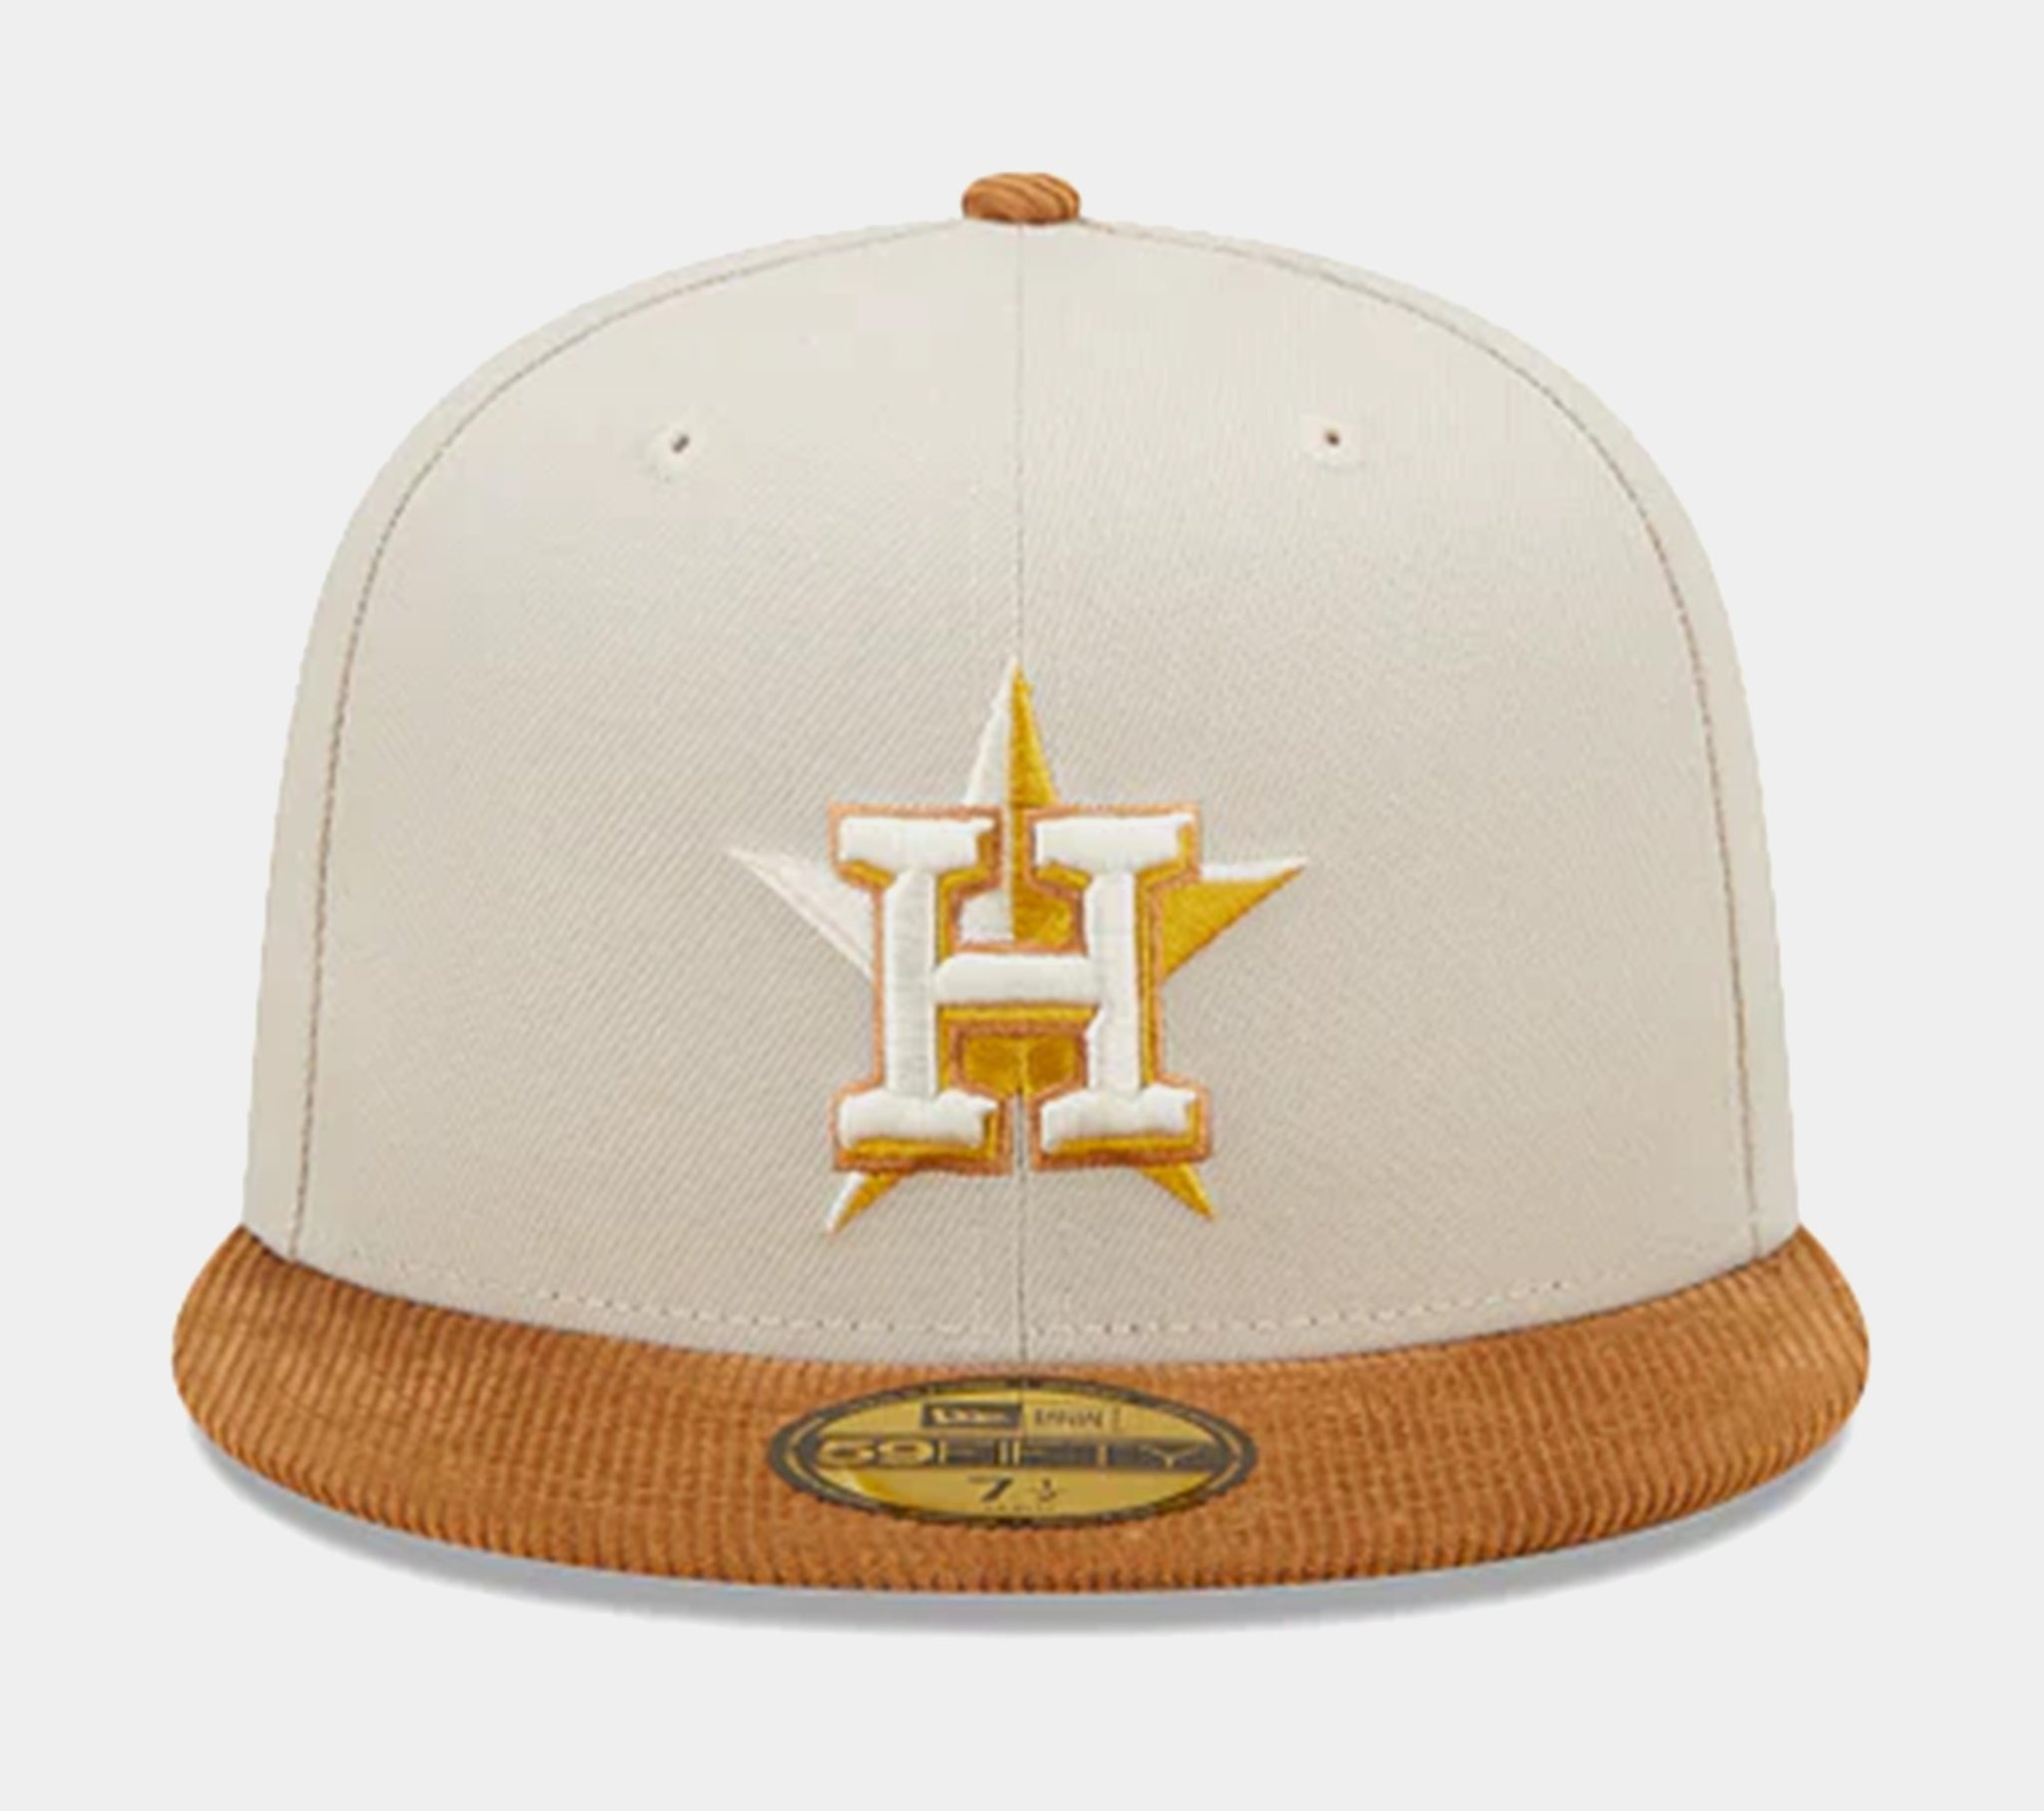 New Era White Houston Astros 2017 World Series Side Patch 59FIFTY Fitted Hat